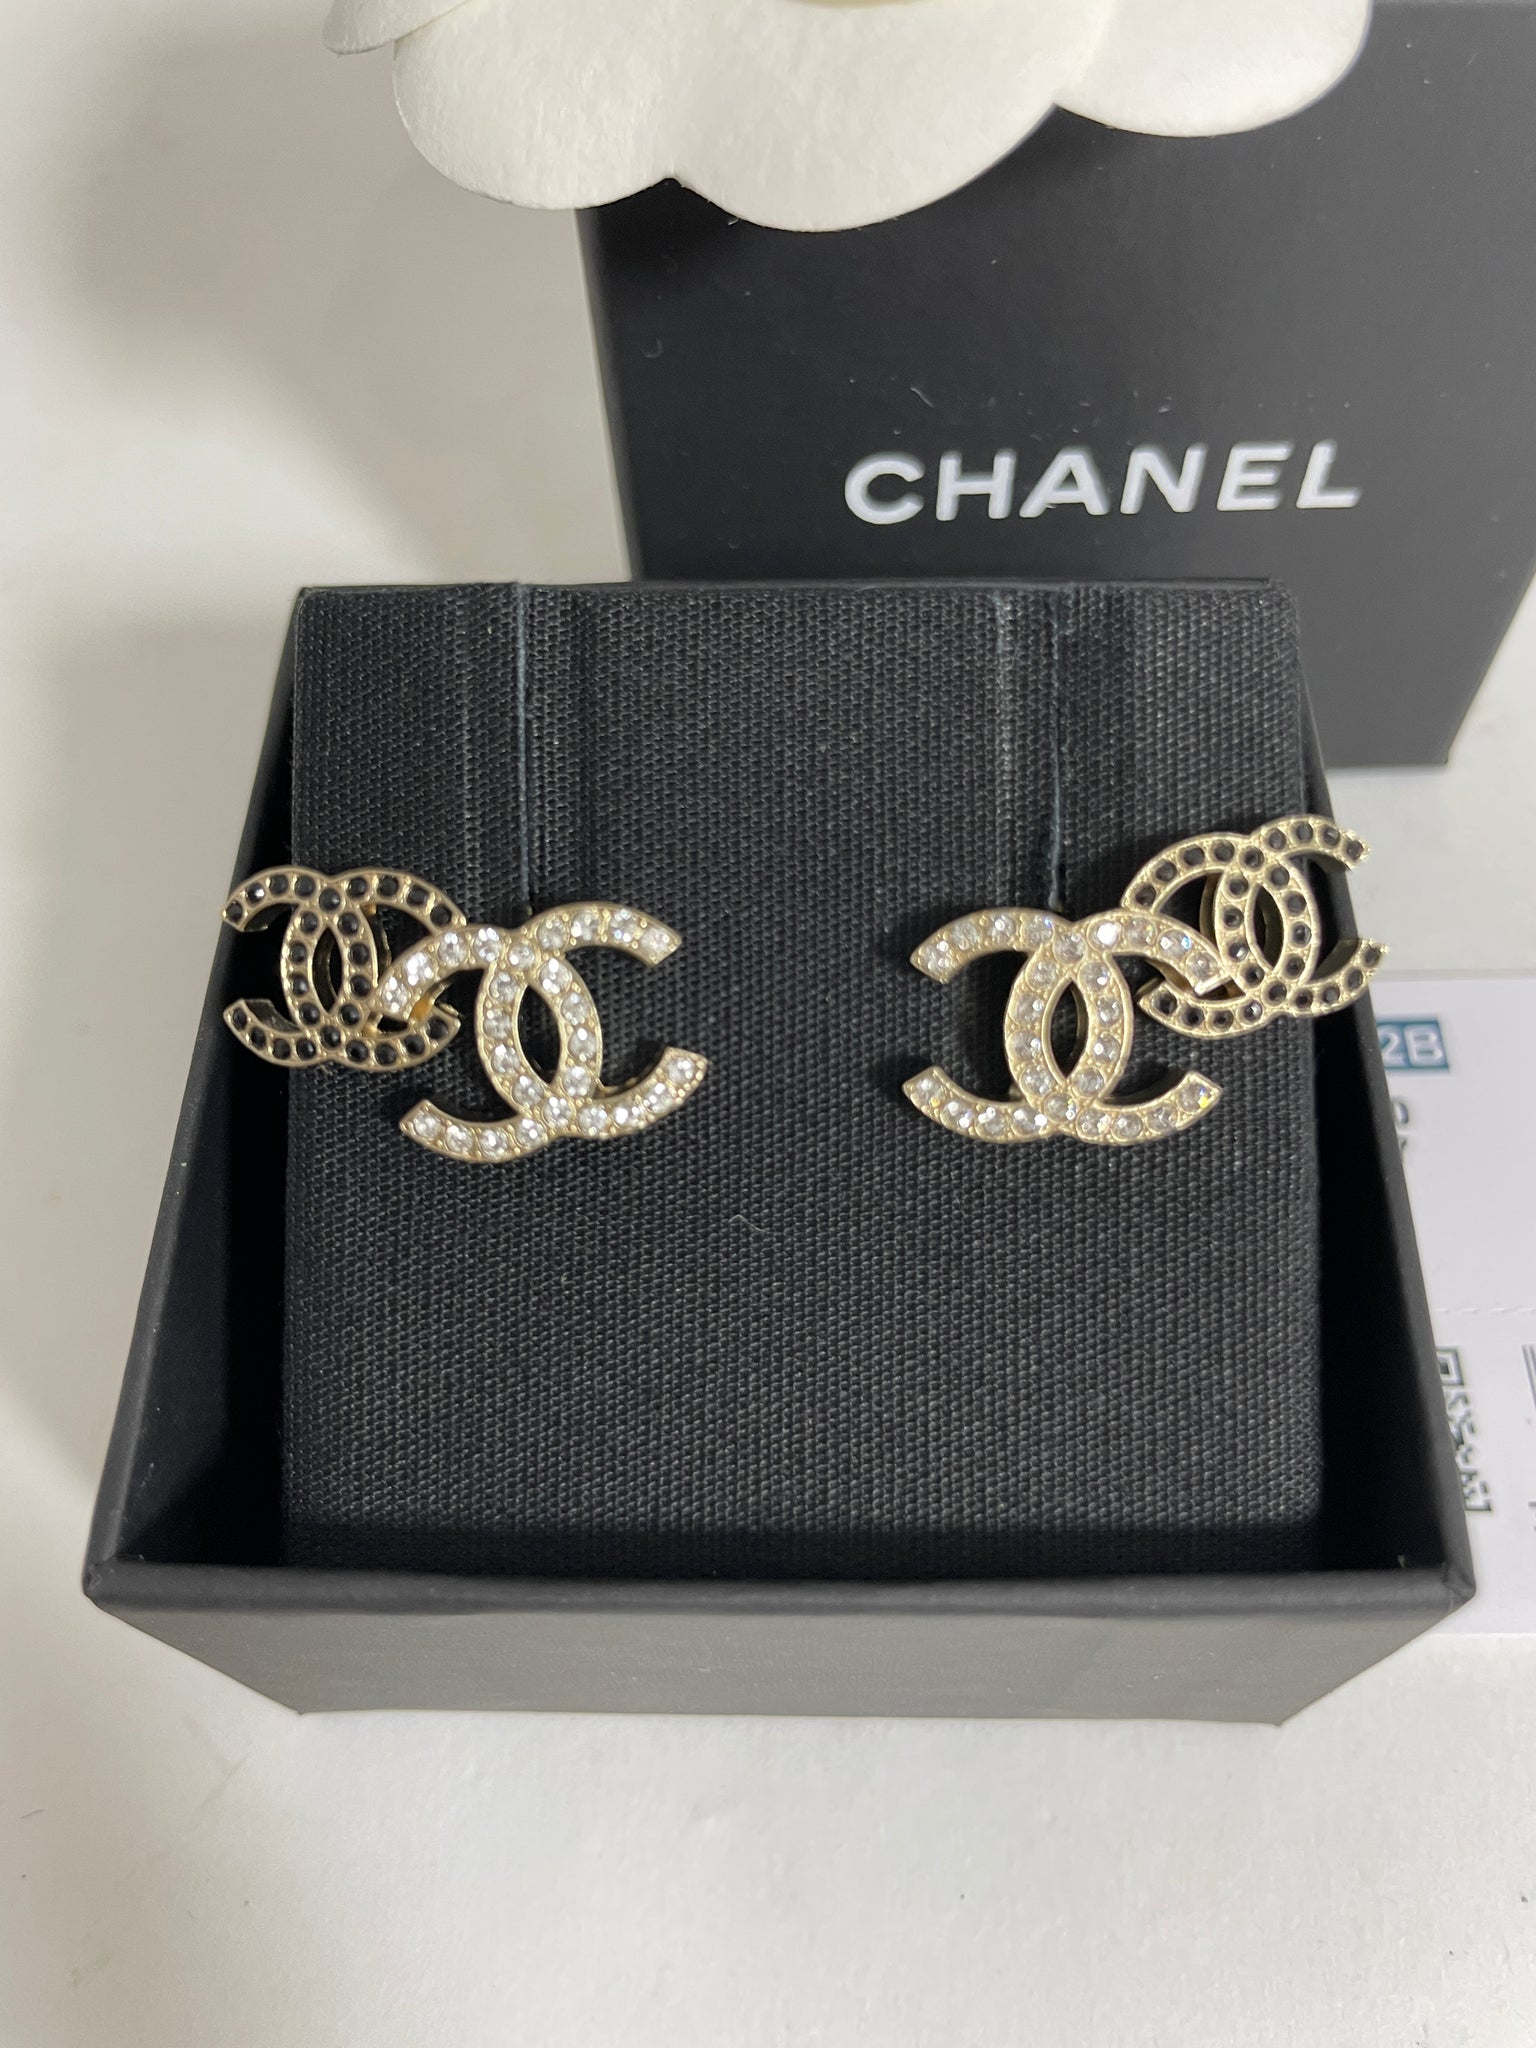 Chanel 22B CC Gold Black White Crystal Double Stud Earrings